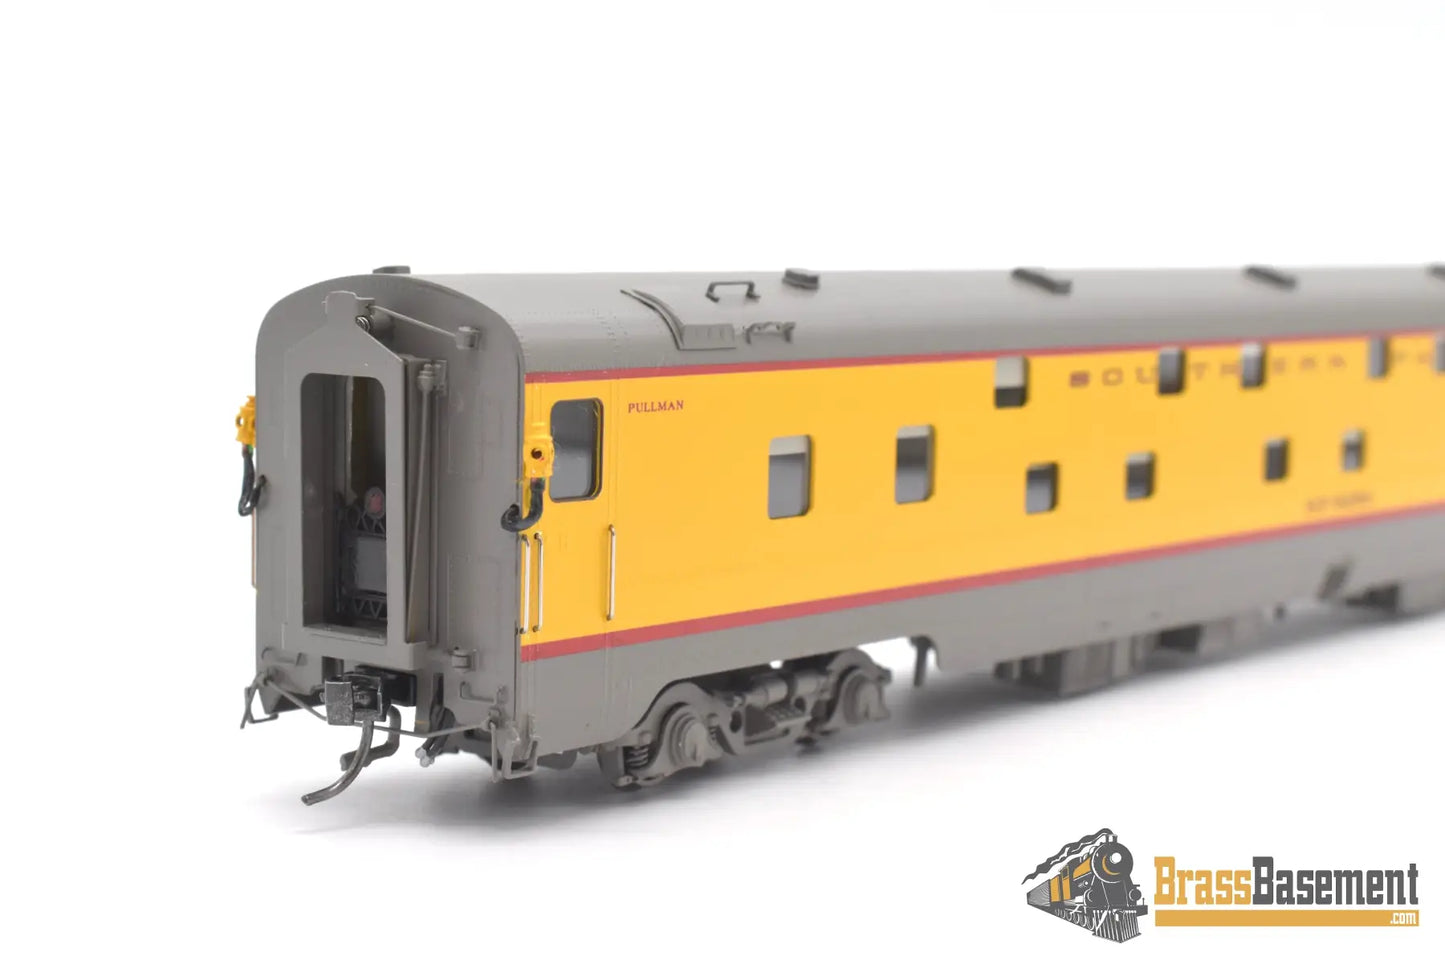 Ho Brass - Tcy 0317.1 Southern Pacific Sp 9250 Lw 12 - 5 Duplex Sleeper Overland Yellow Brand New